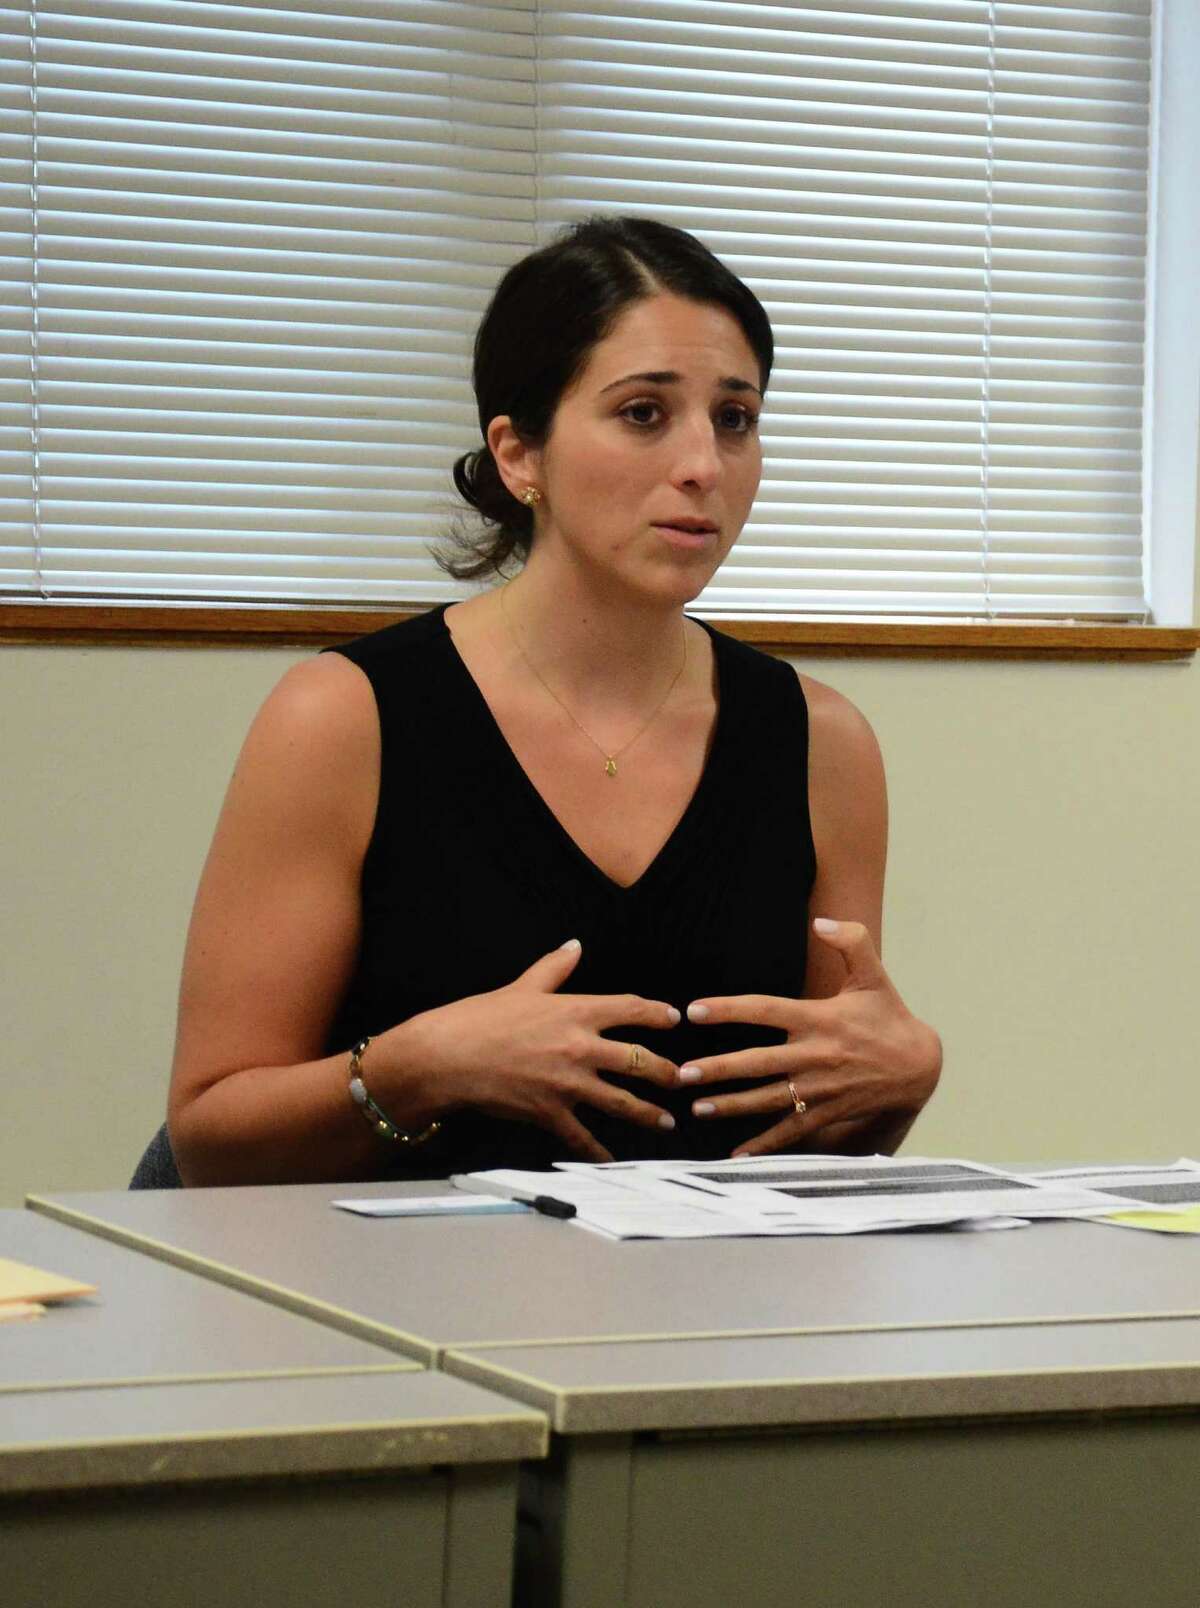 Setta Mushegian, of the Stamford-based Center for Sexual Assault Crisis Counseling and Education, talks about ways college students should arm themselves against sexual violence on campus. Mushegian and other local sexual assault and domestic violence experts met to discuss such topics with town leaders Monday, July 21, 2014, at the New Canaan Police Department, in New Canaan, Conn.